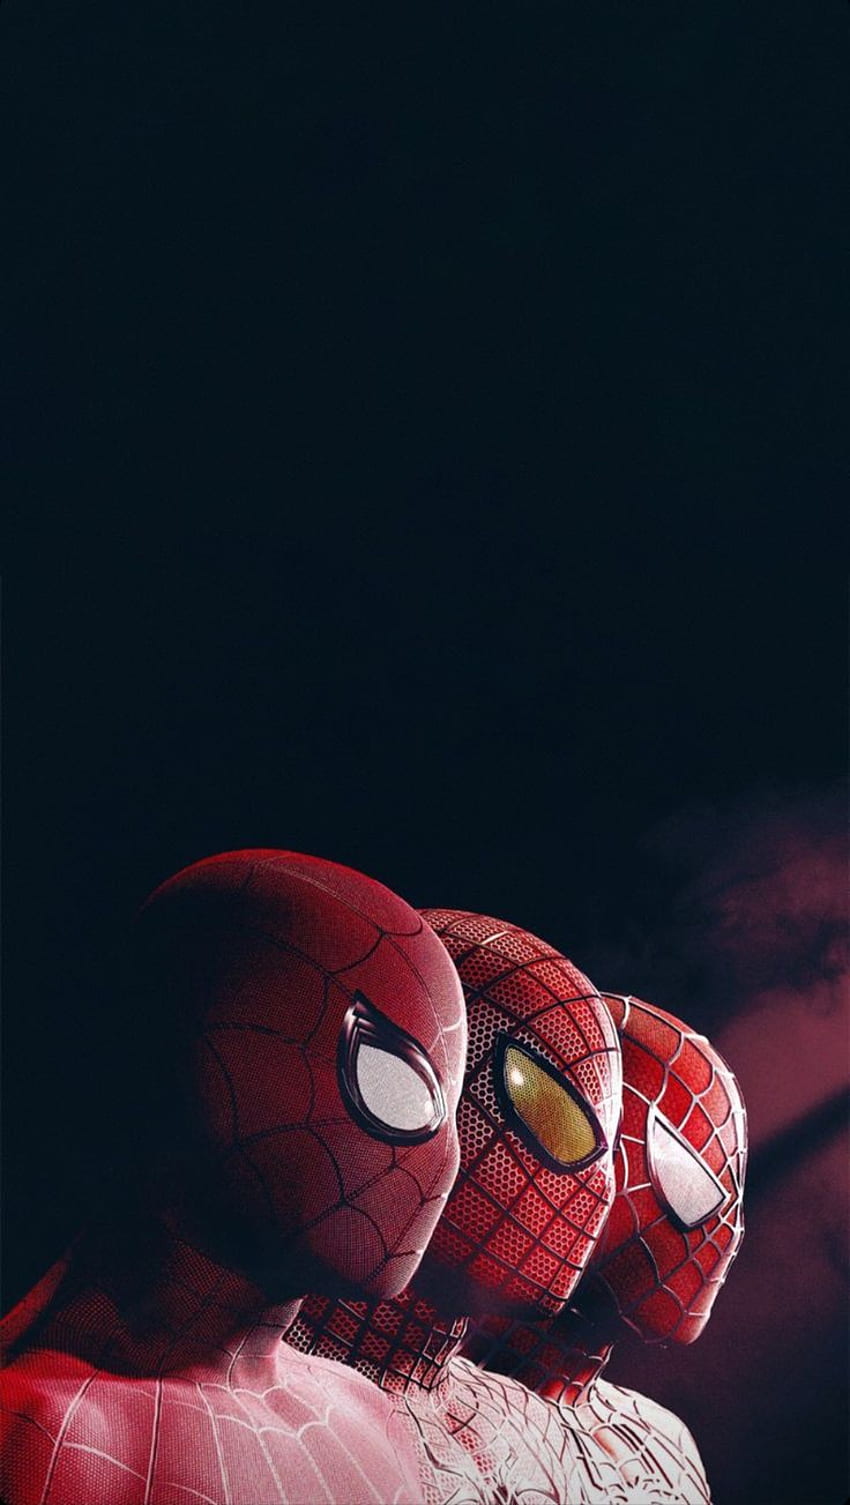 Spiderman, tobey-maguire, tom-holland, tom, Garfield, maguire, holland, tobey, andrew, andrew-garfield HD phone wallpaper